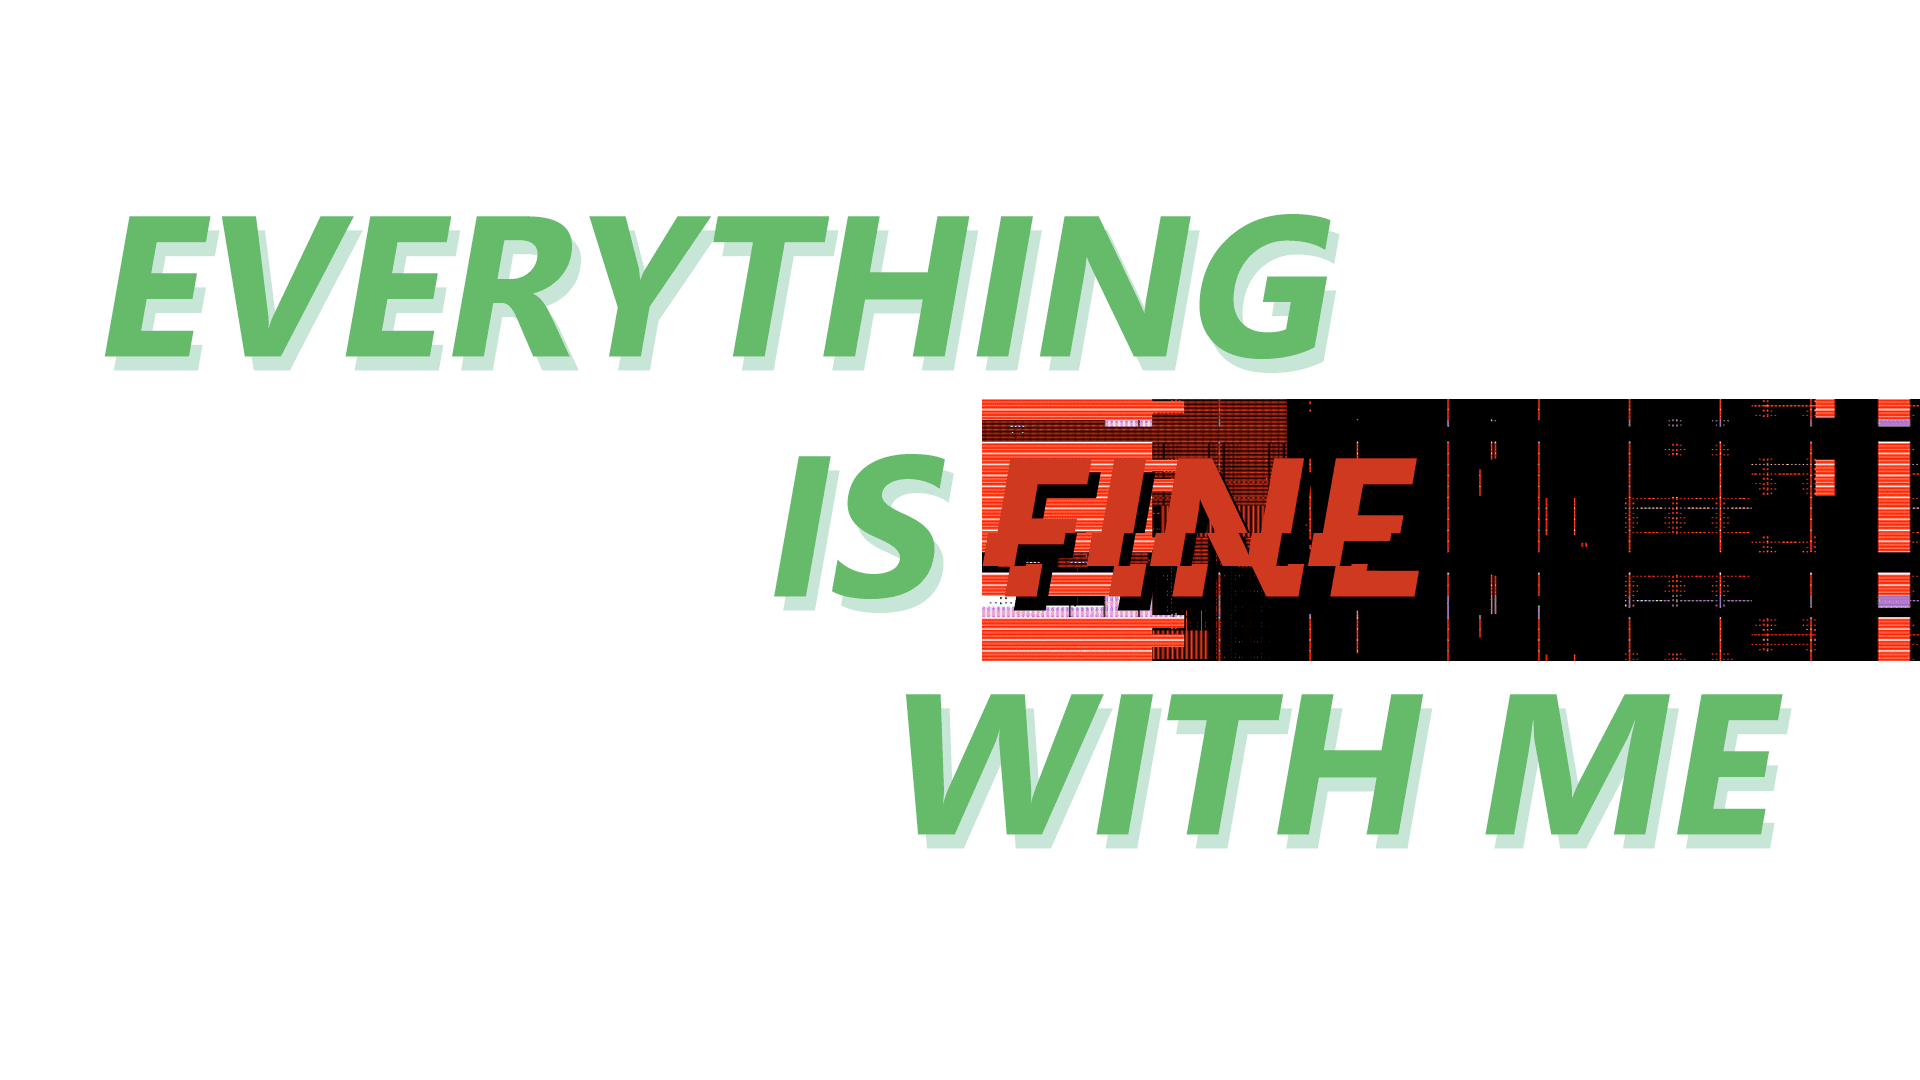 An "everything is fine" sign with the "fine" part being heavily corrupted.